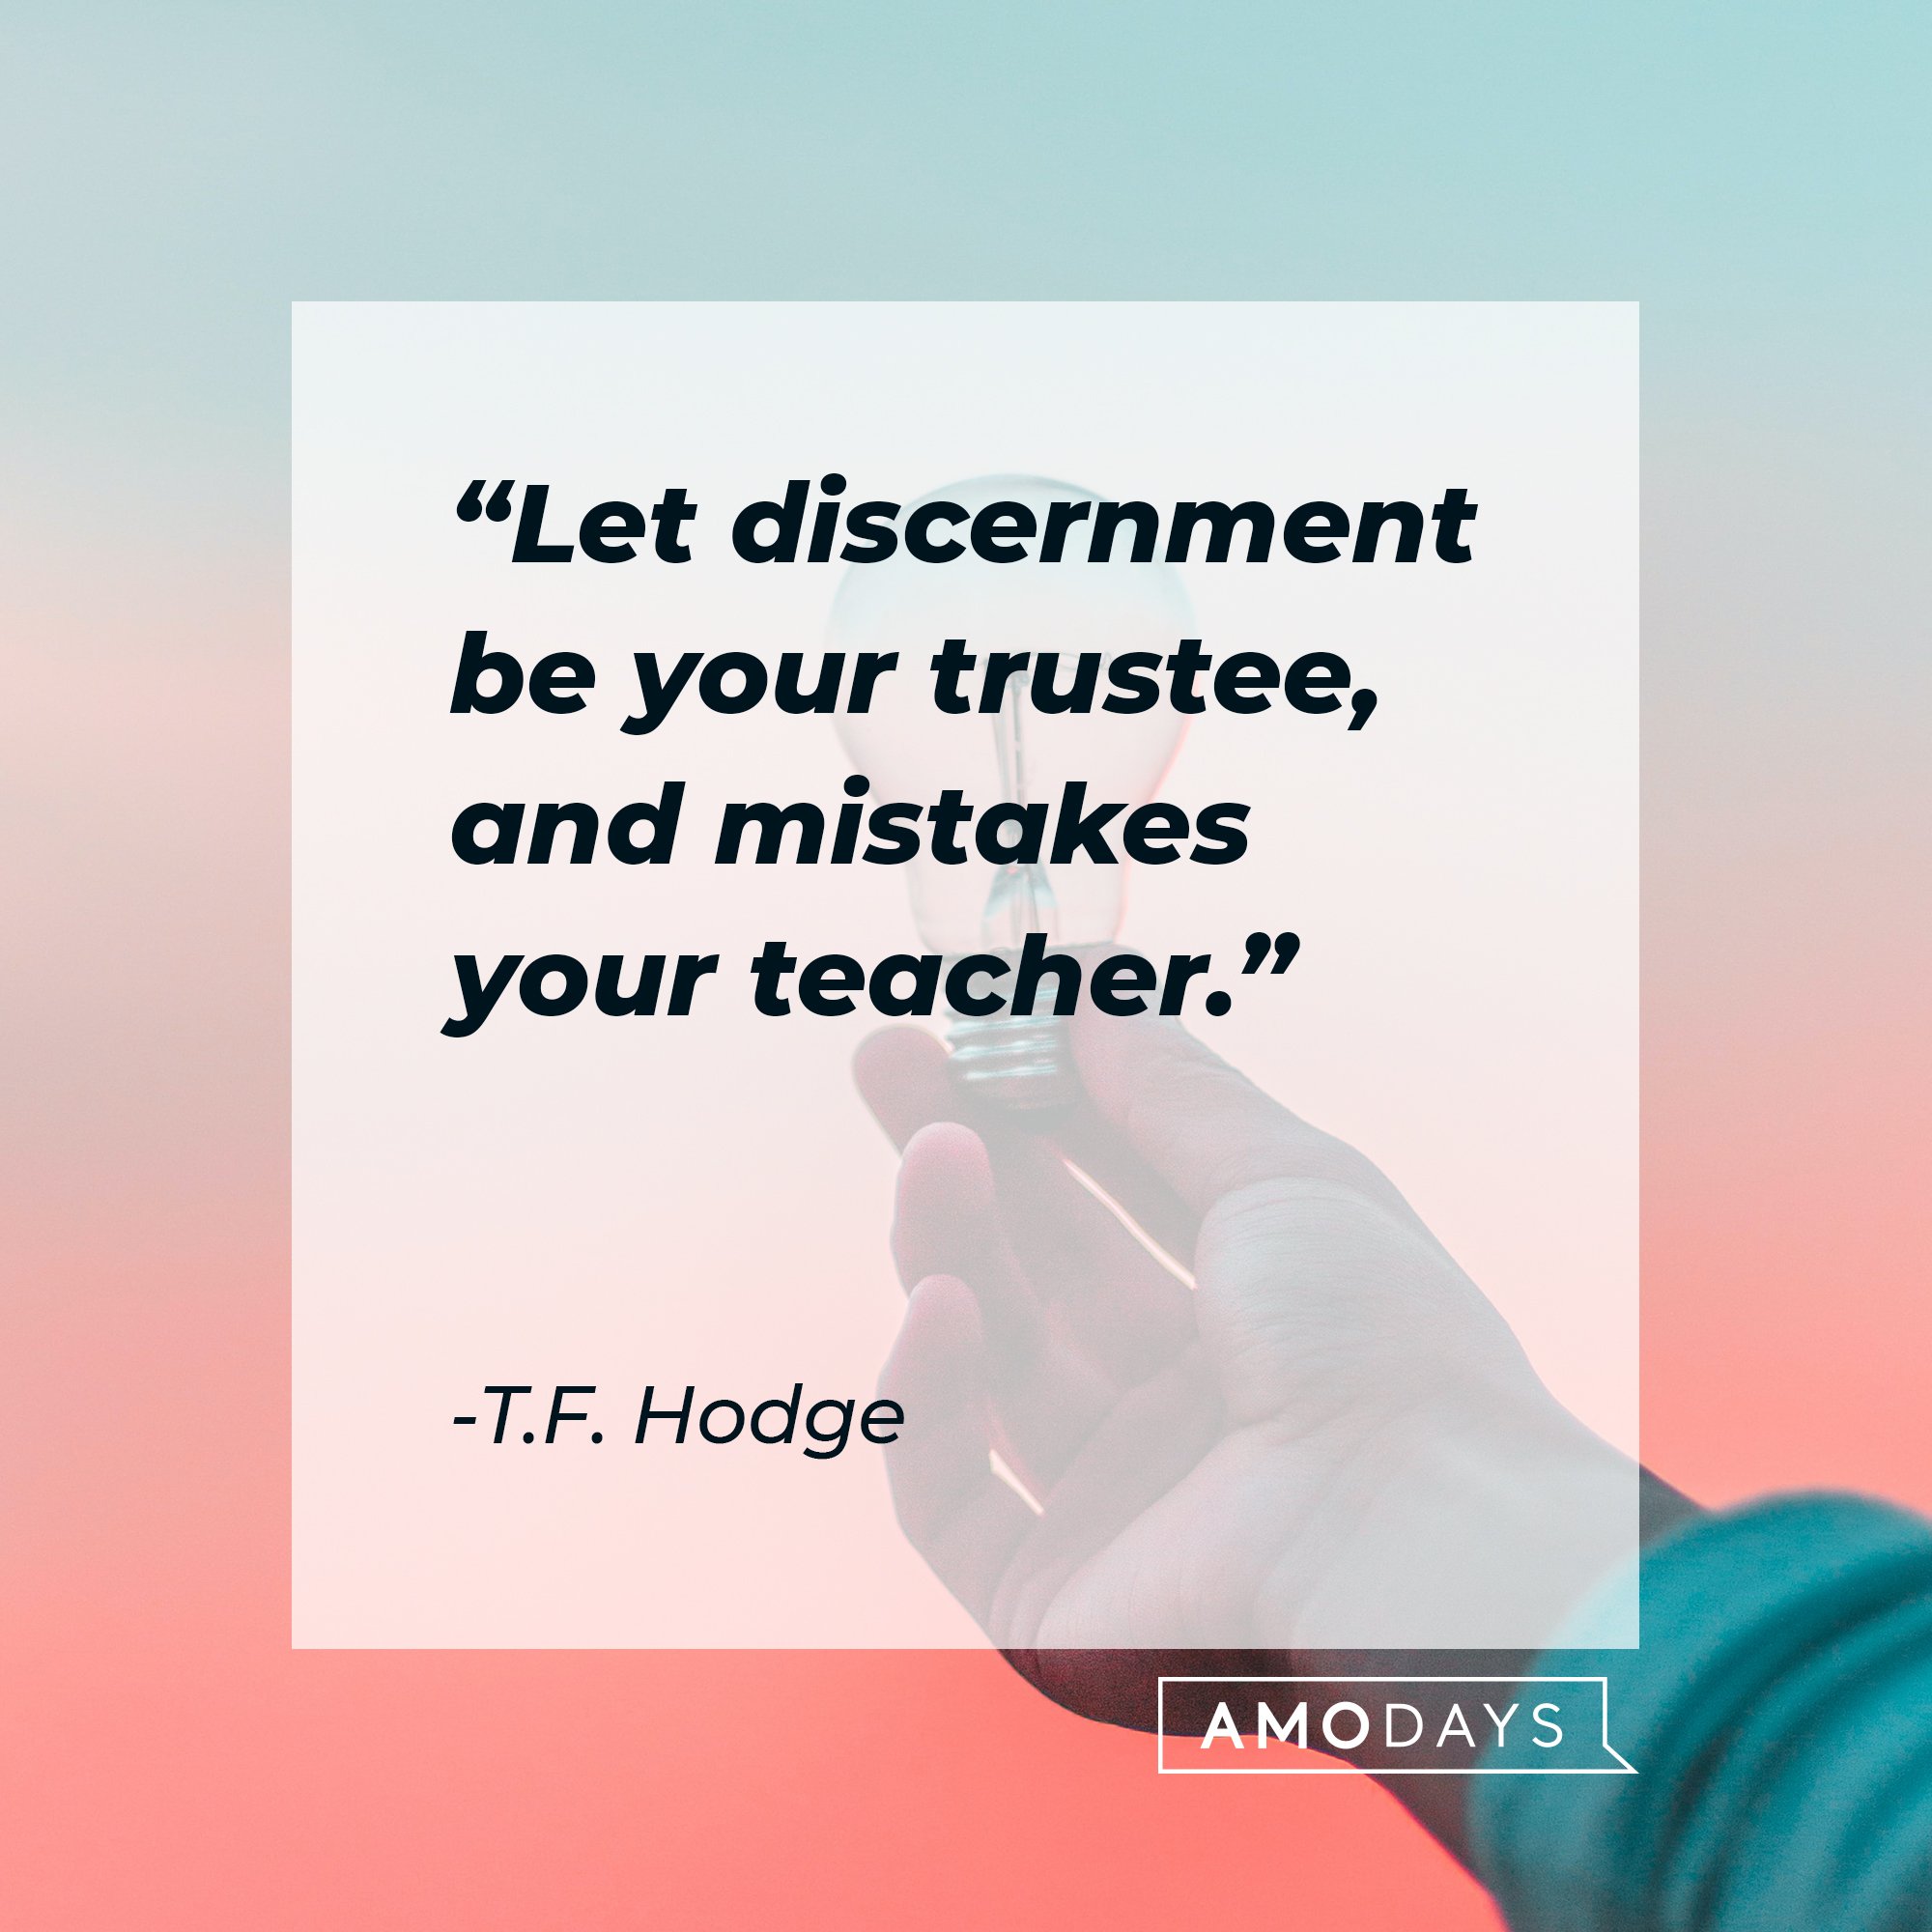 T.F. Hodge’s quote: "Let discernment be your trustee, and mistakes your teacher." | Image: AmoDays